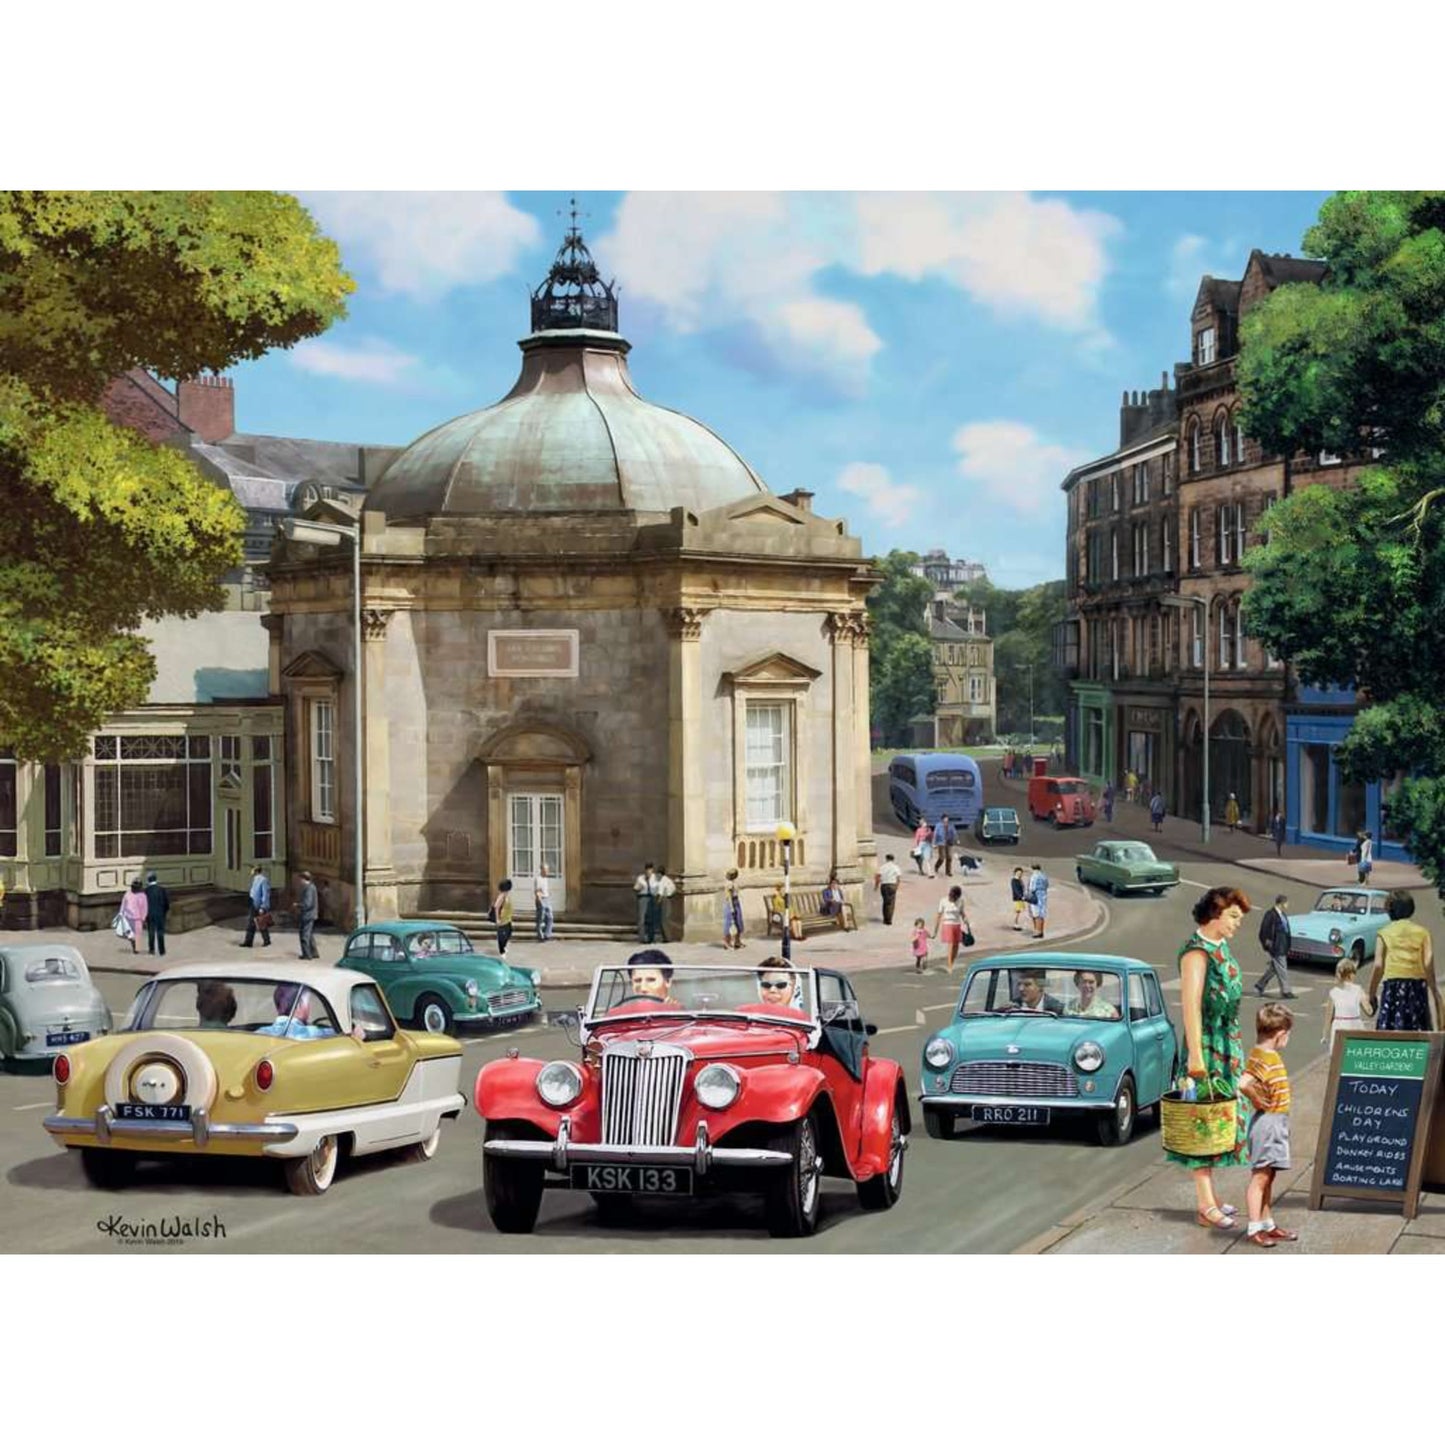 Happy Days, Look North! Jigsaw Puzzle 4x500 Piece - The Great Yorkshire Shop